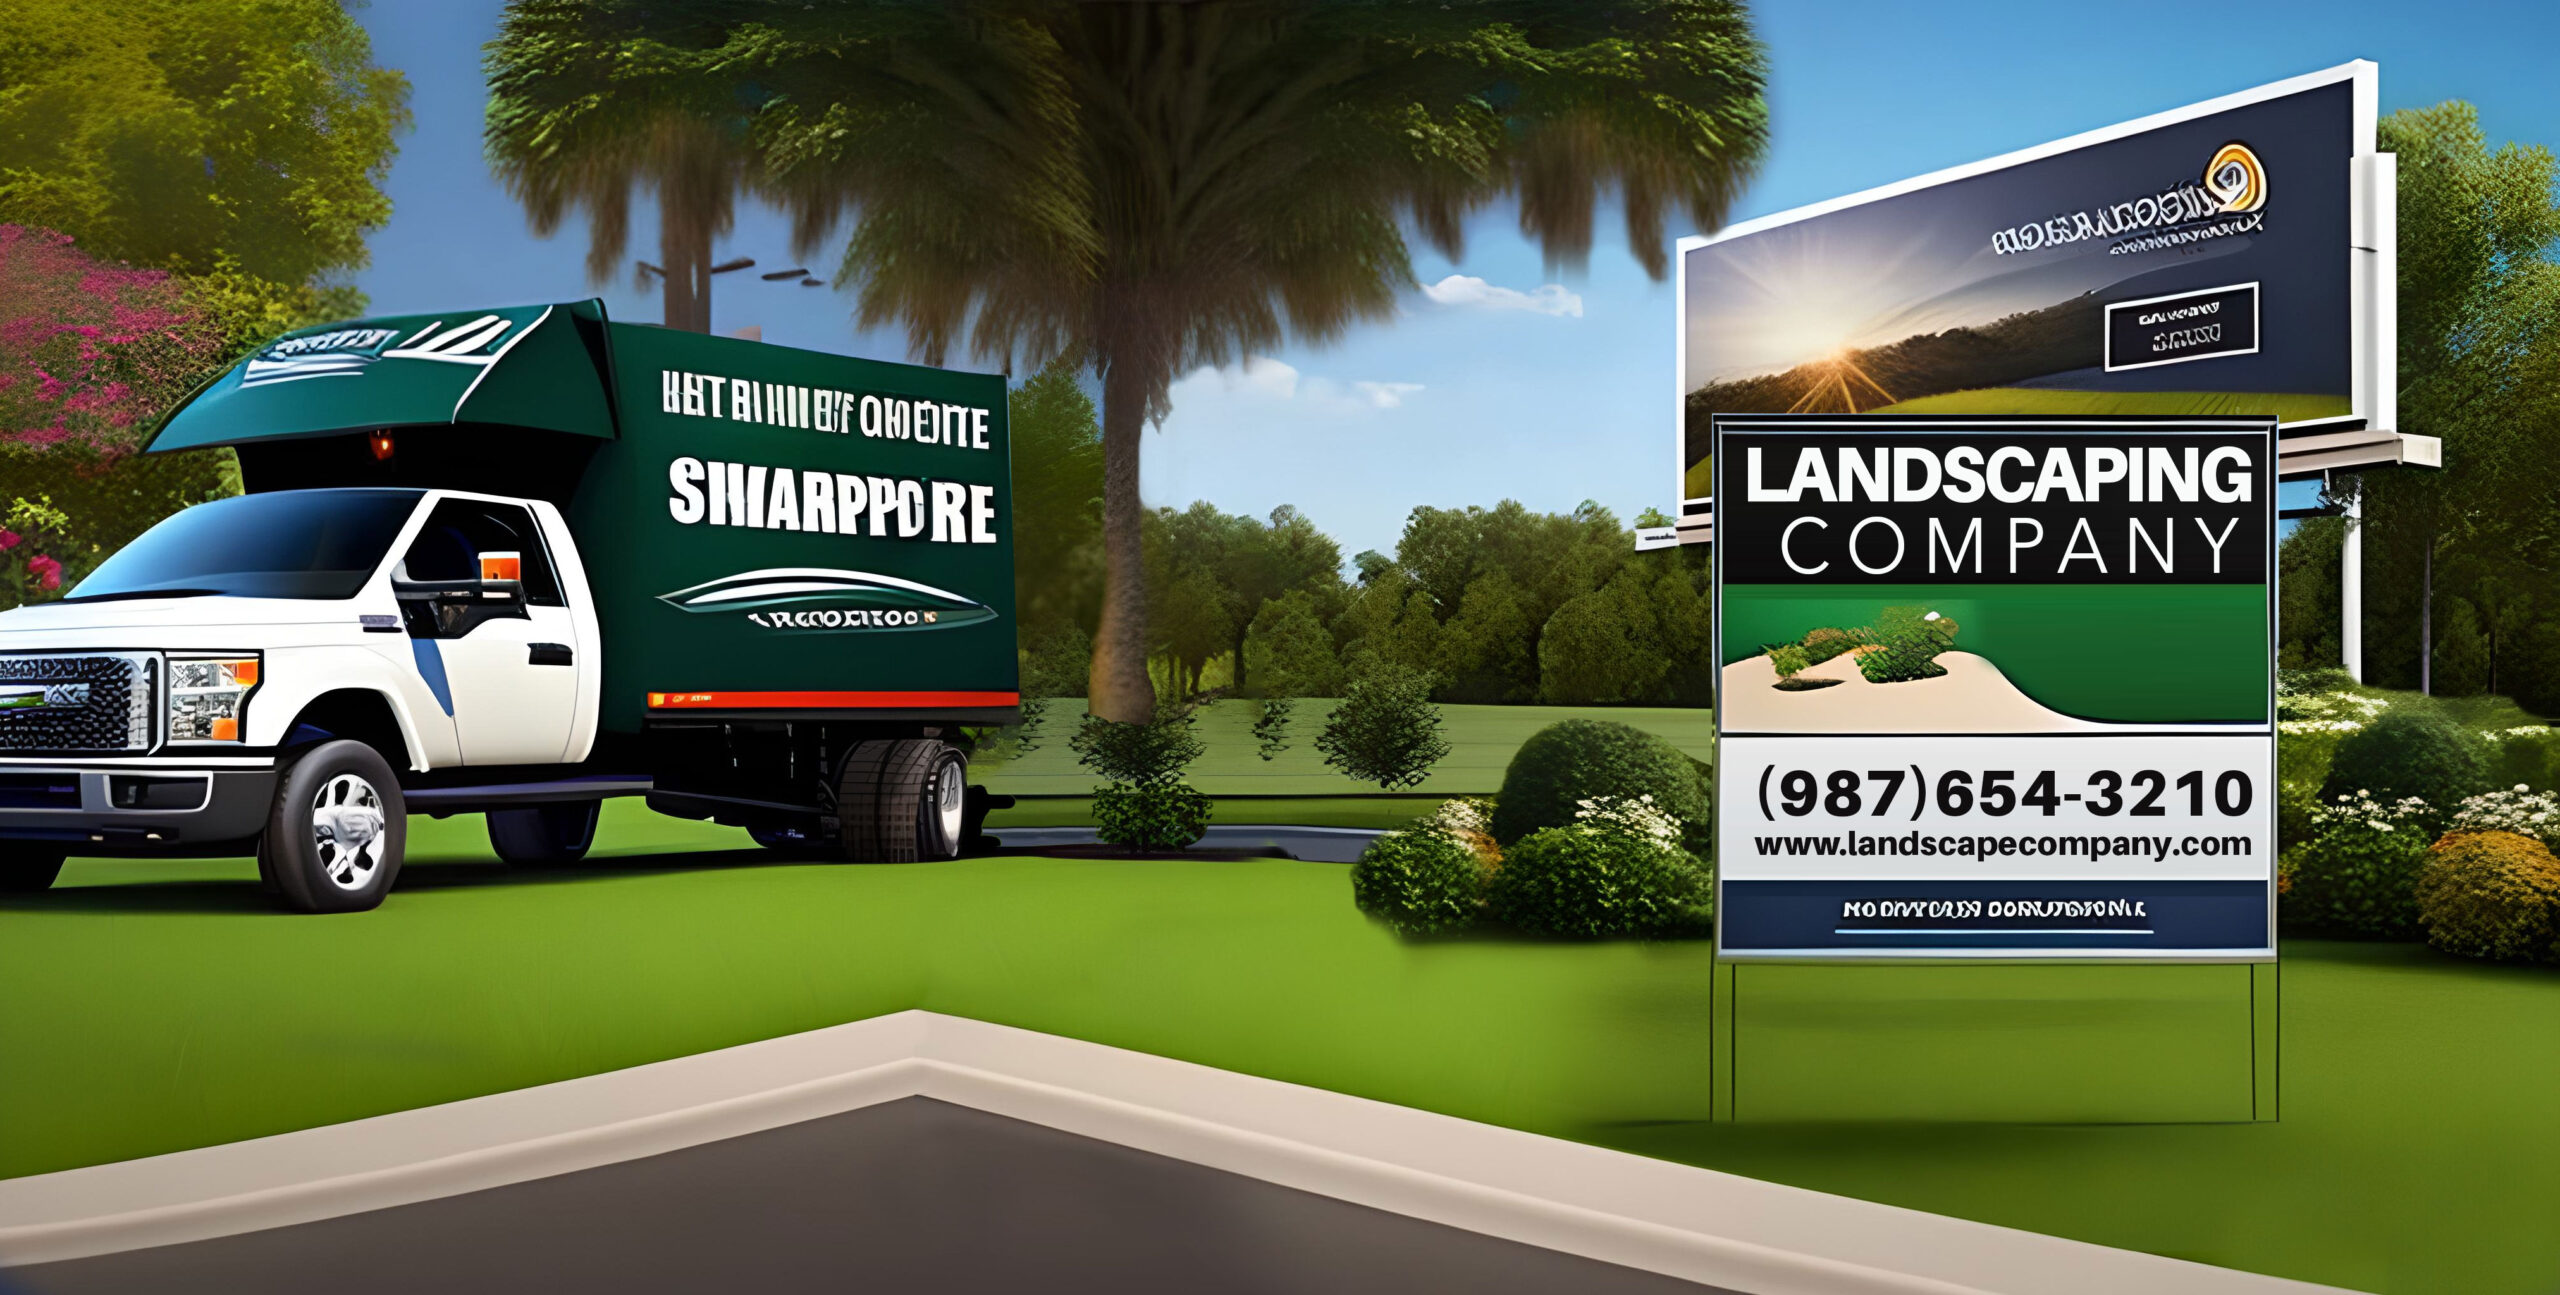 How to Design a Yard Sign, Vehicle Magnet or Vehicle Graphic for a Landscaping Business